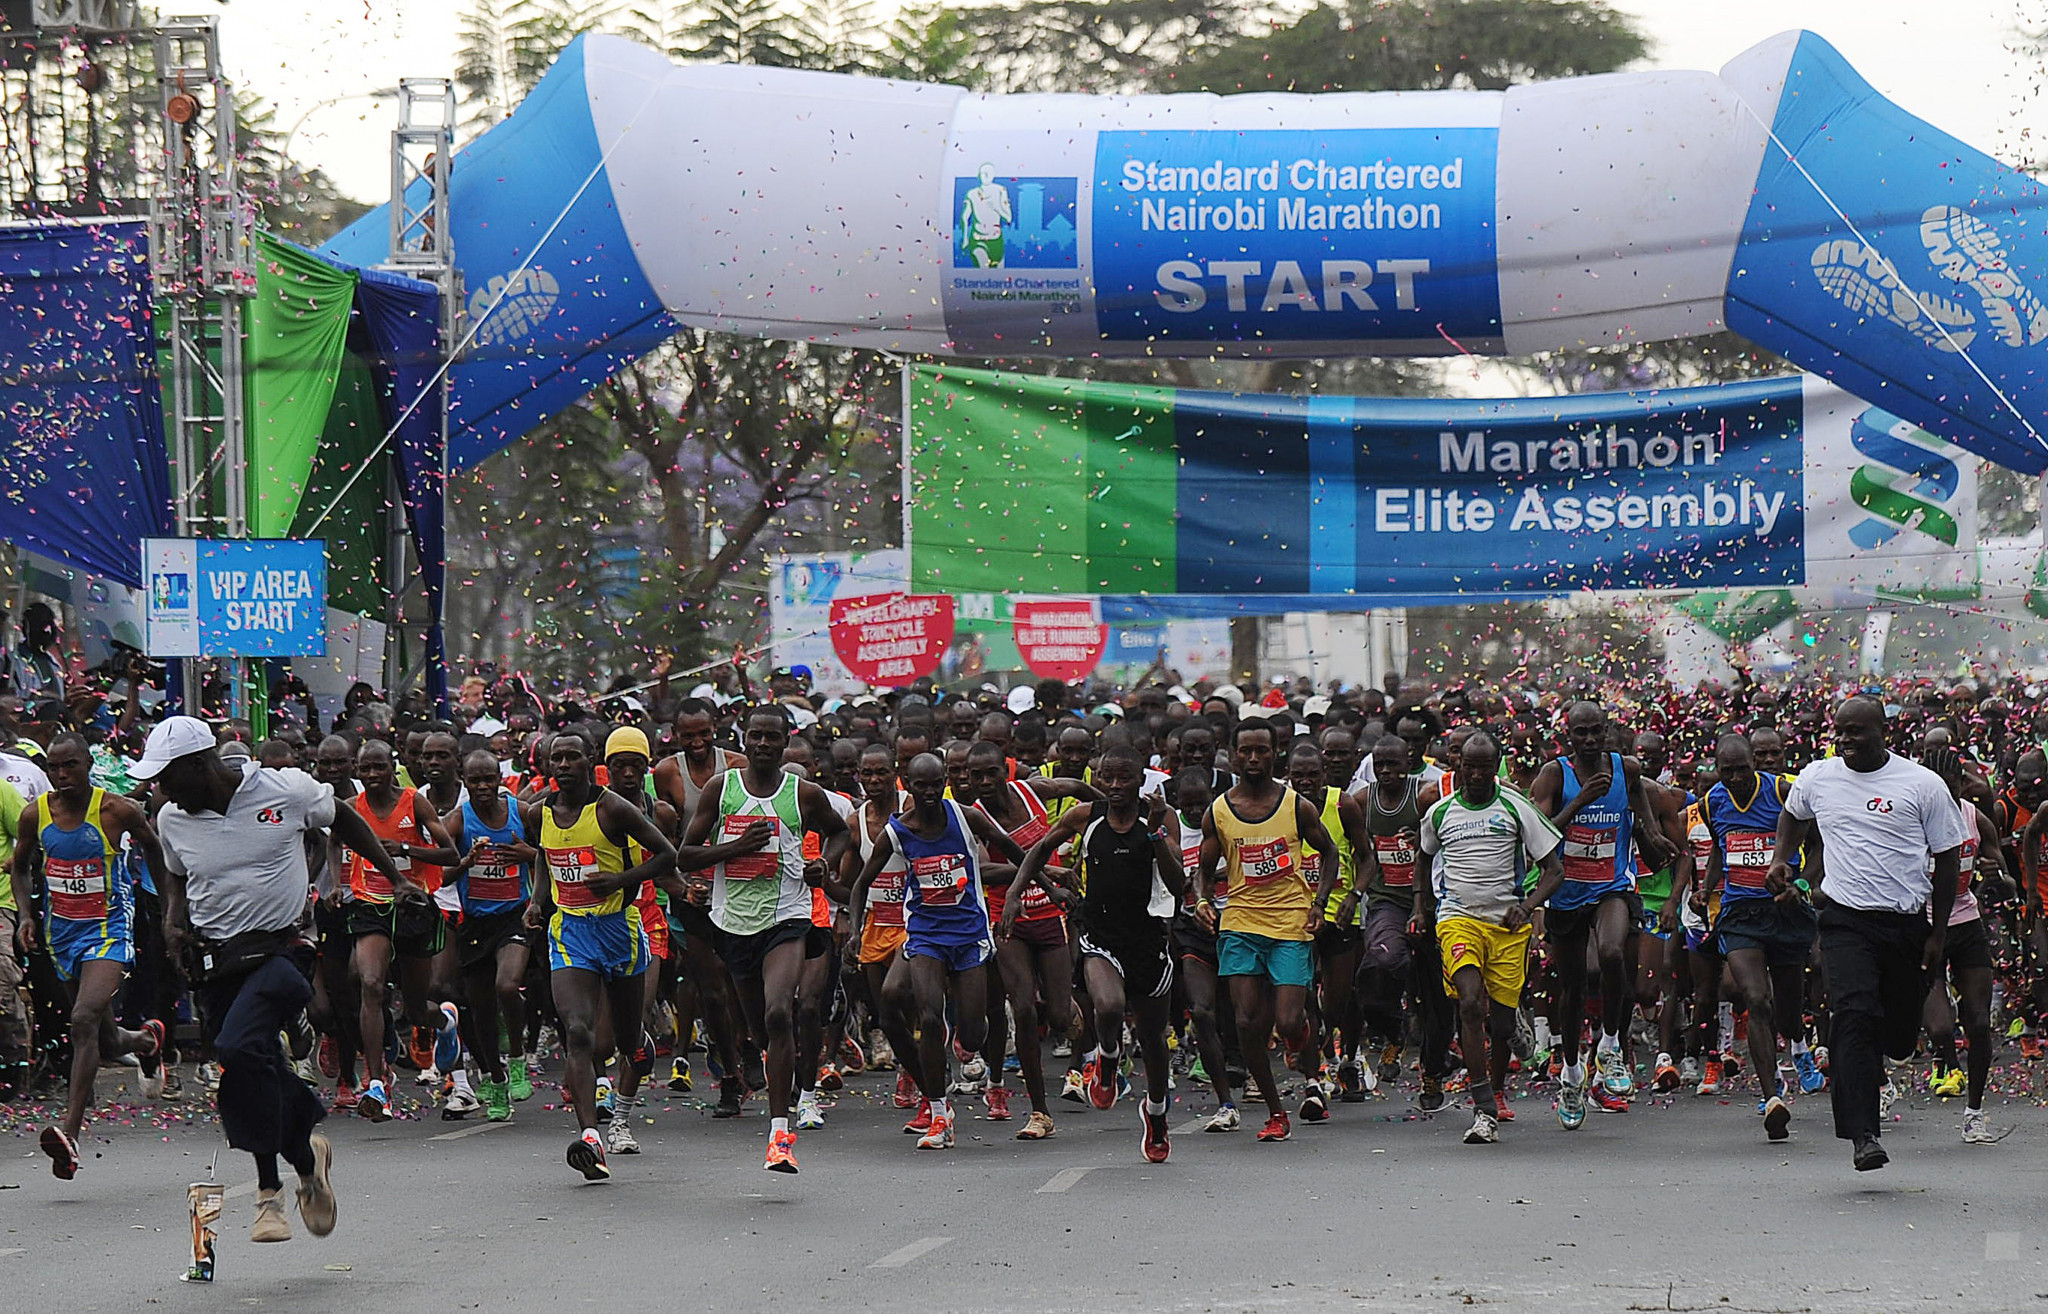 Standard Chartered backs the Nairobi Marathon which was cancelled this year ©Getty Images